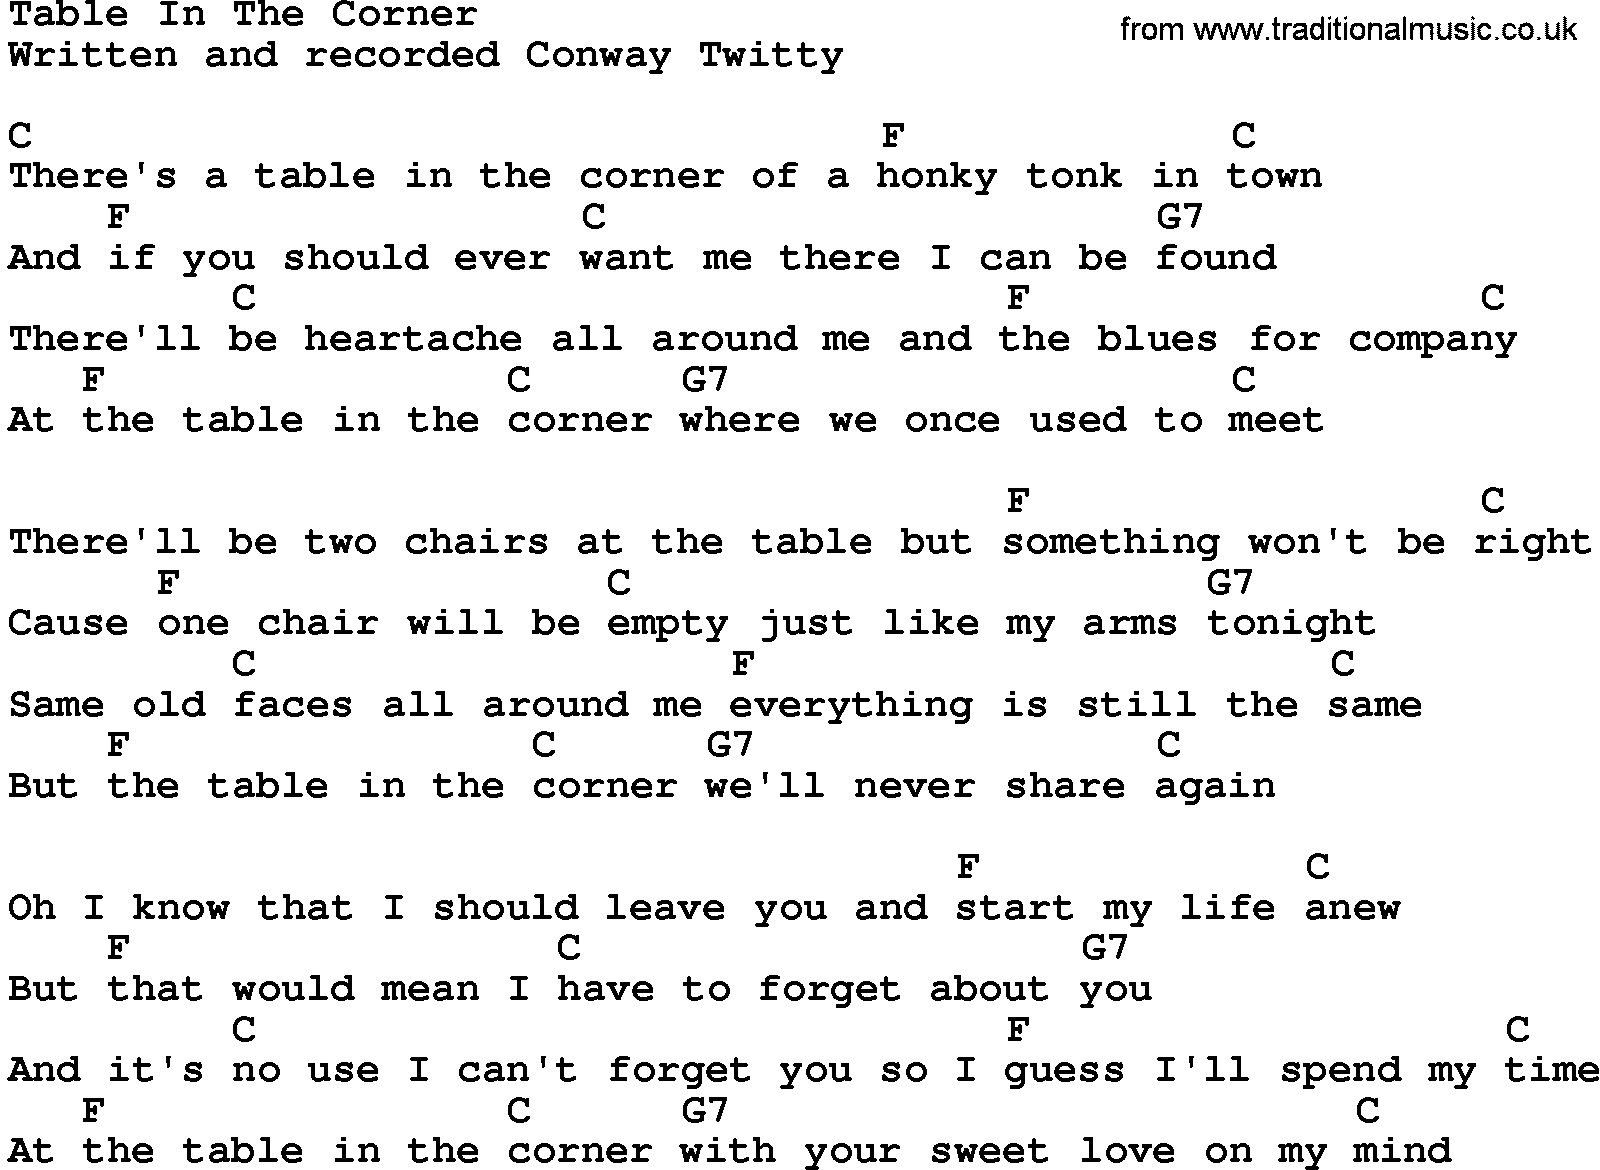 Country music song: Table In The Corner lyrics and chords